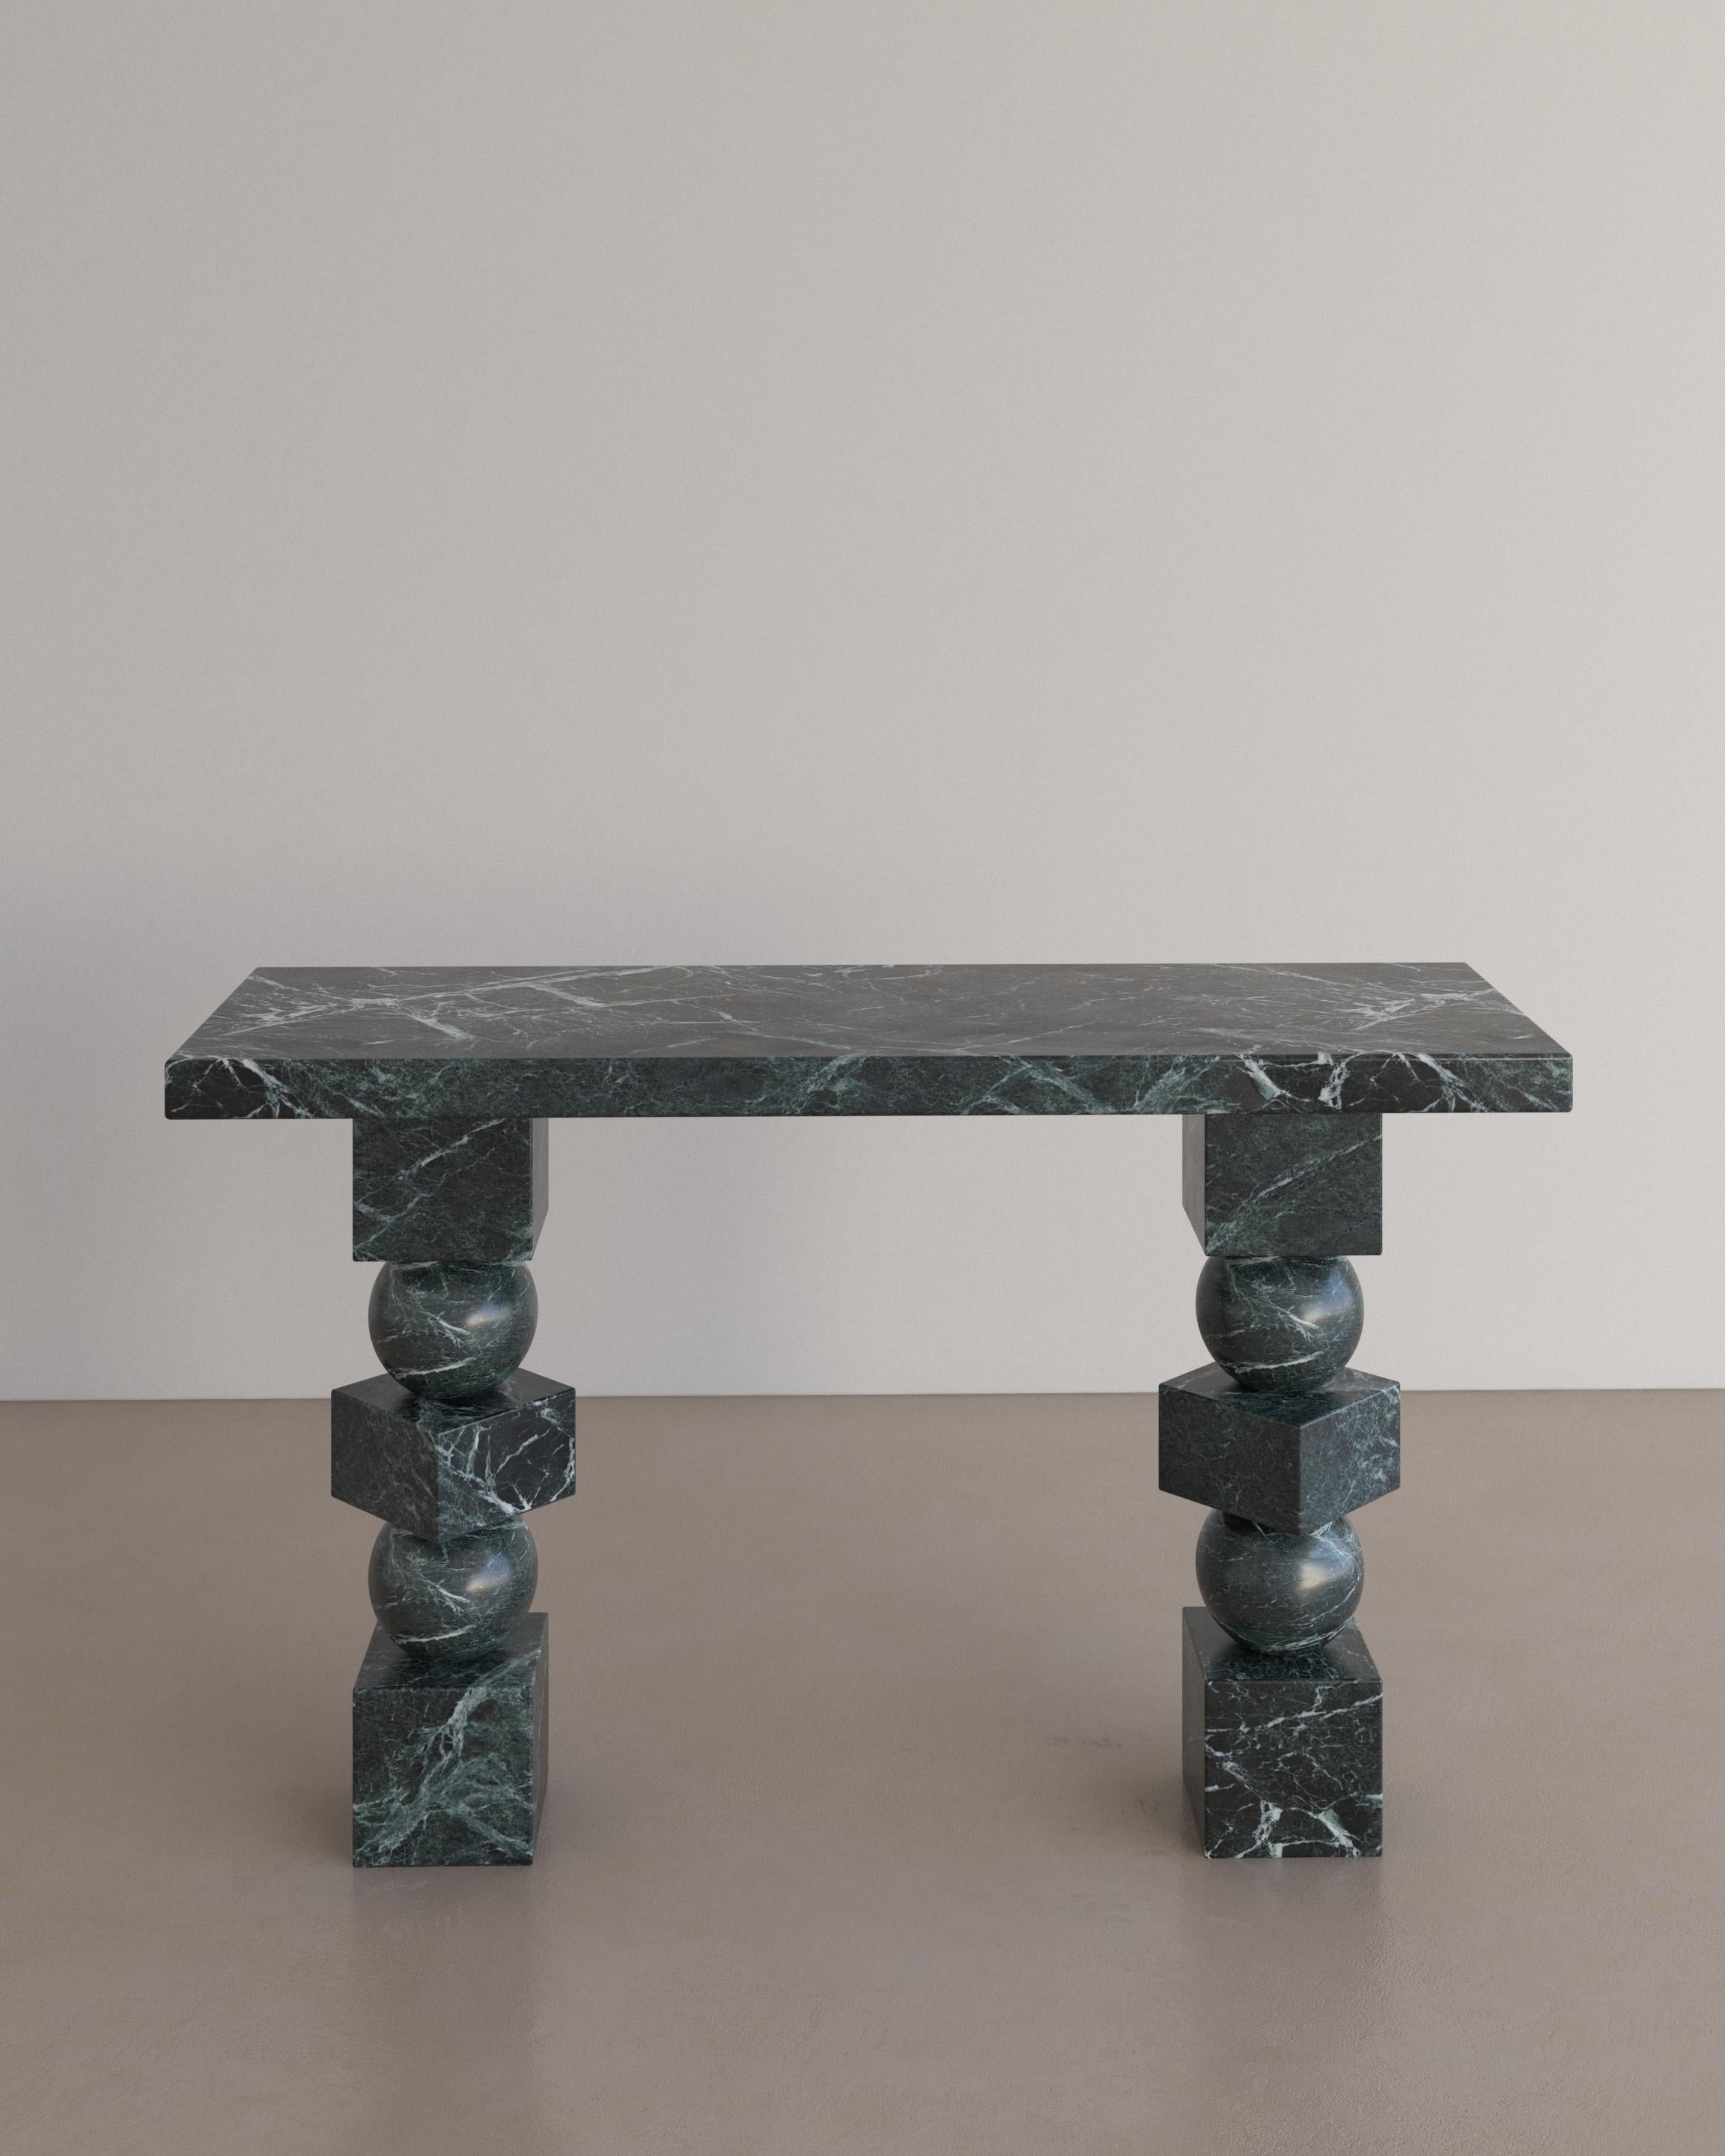 The Sufi Console Table in Nero Marquina Marble by The Essentialist celebrates proportion, scale and ancestral power. Three simple geometric shapes, stacked in a sequence bursts with undeniable energy, courtesy of the natural stone they are carved